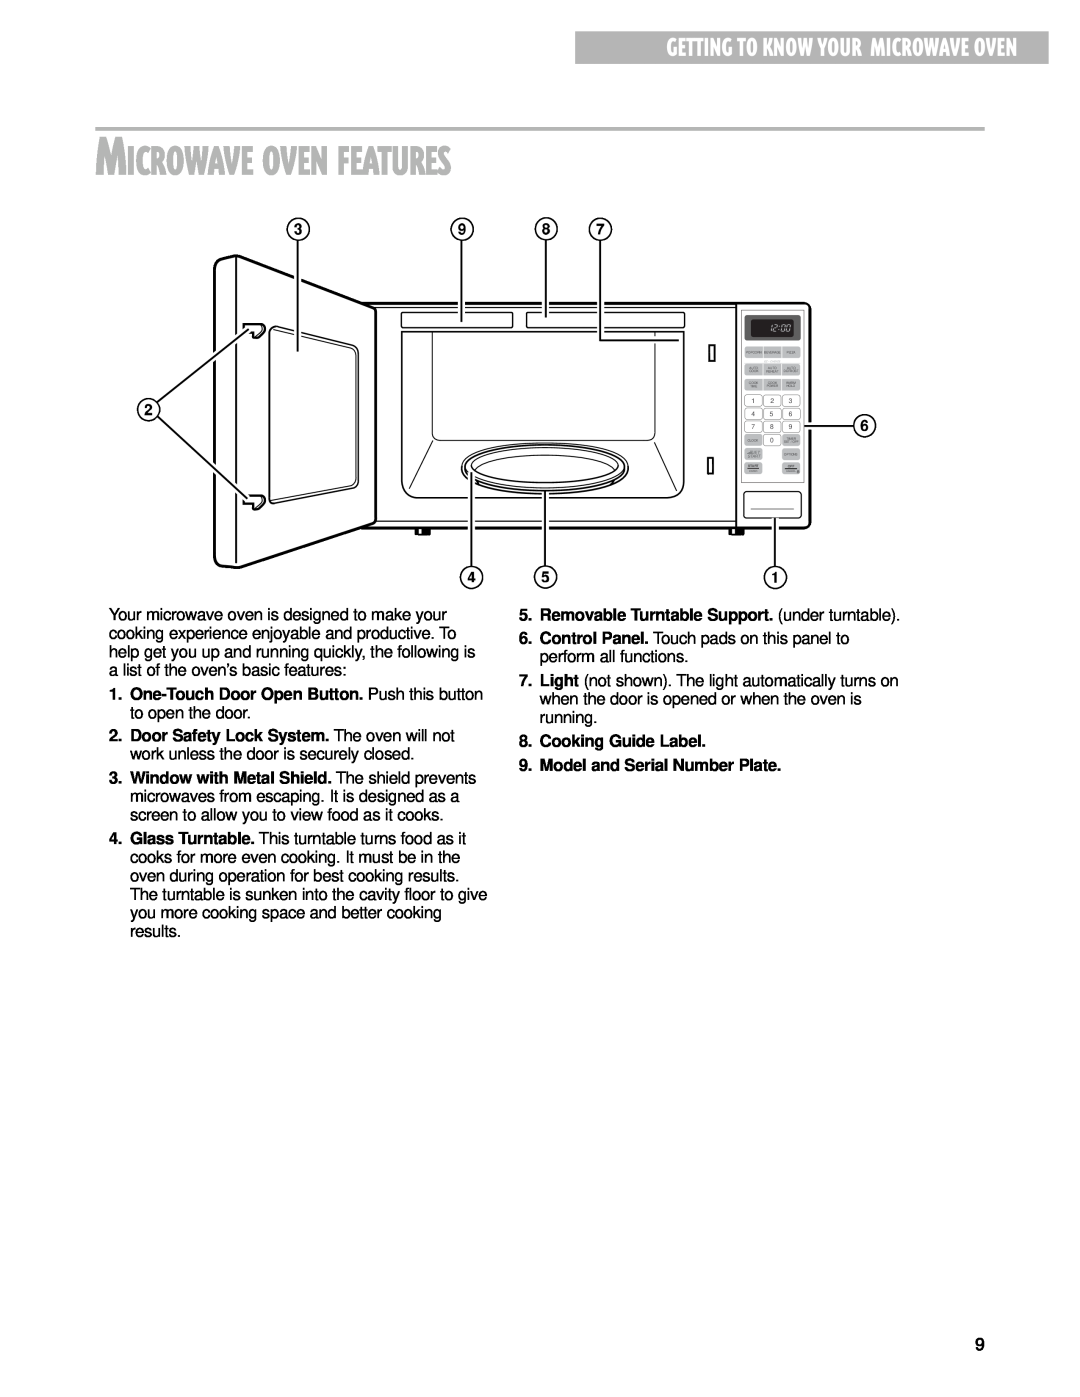 Whirlpool MT4210SK, MT4140SK installation instructions Microwave Oven Features, Getting To Know Your Microwave Oven 